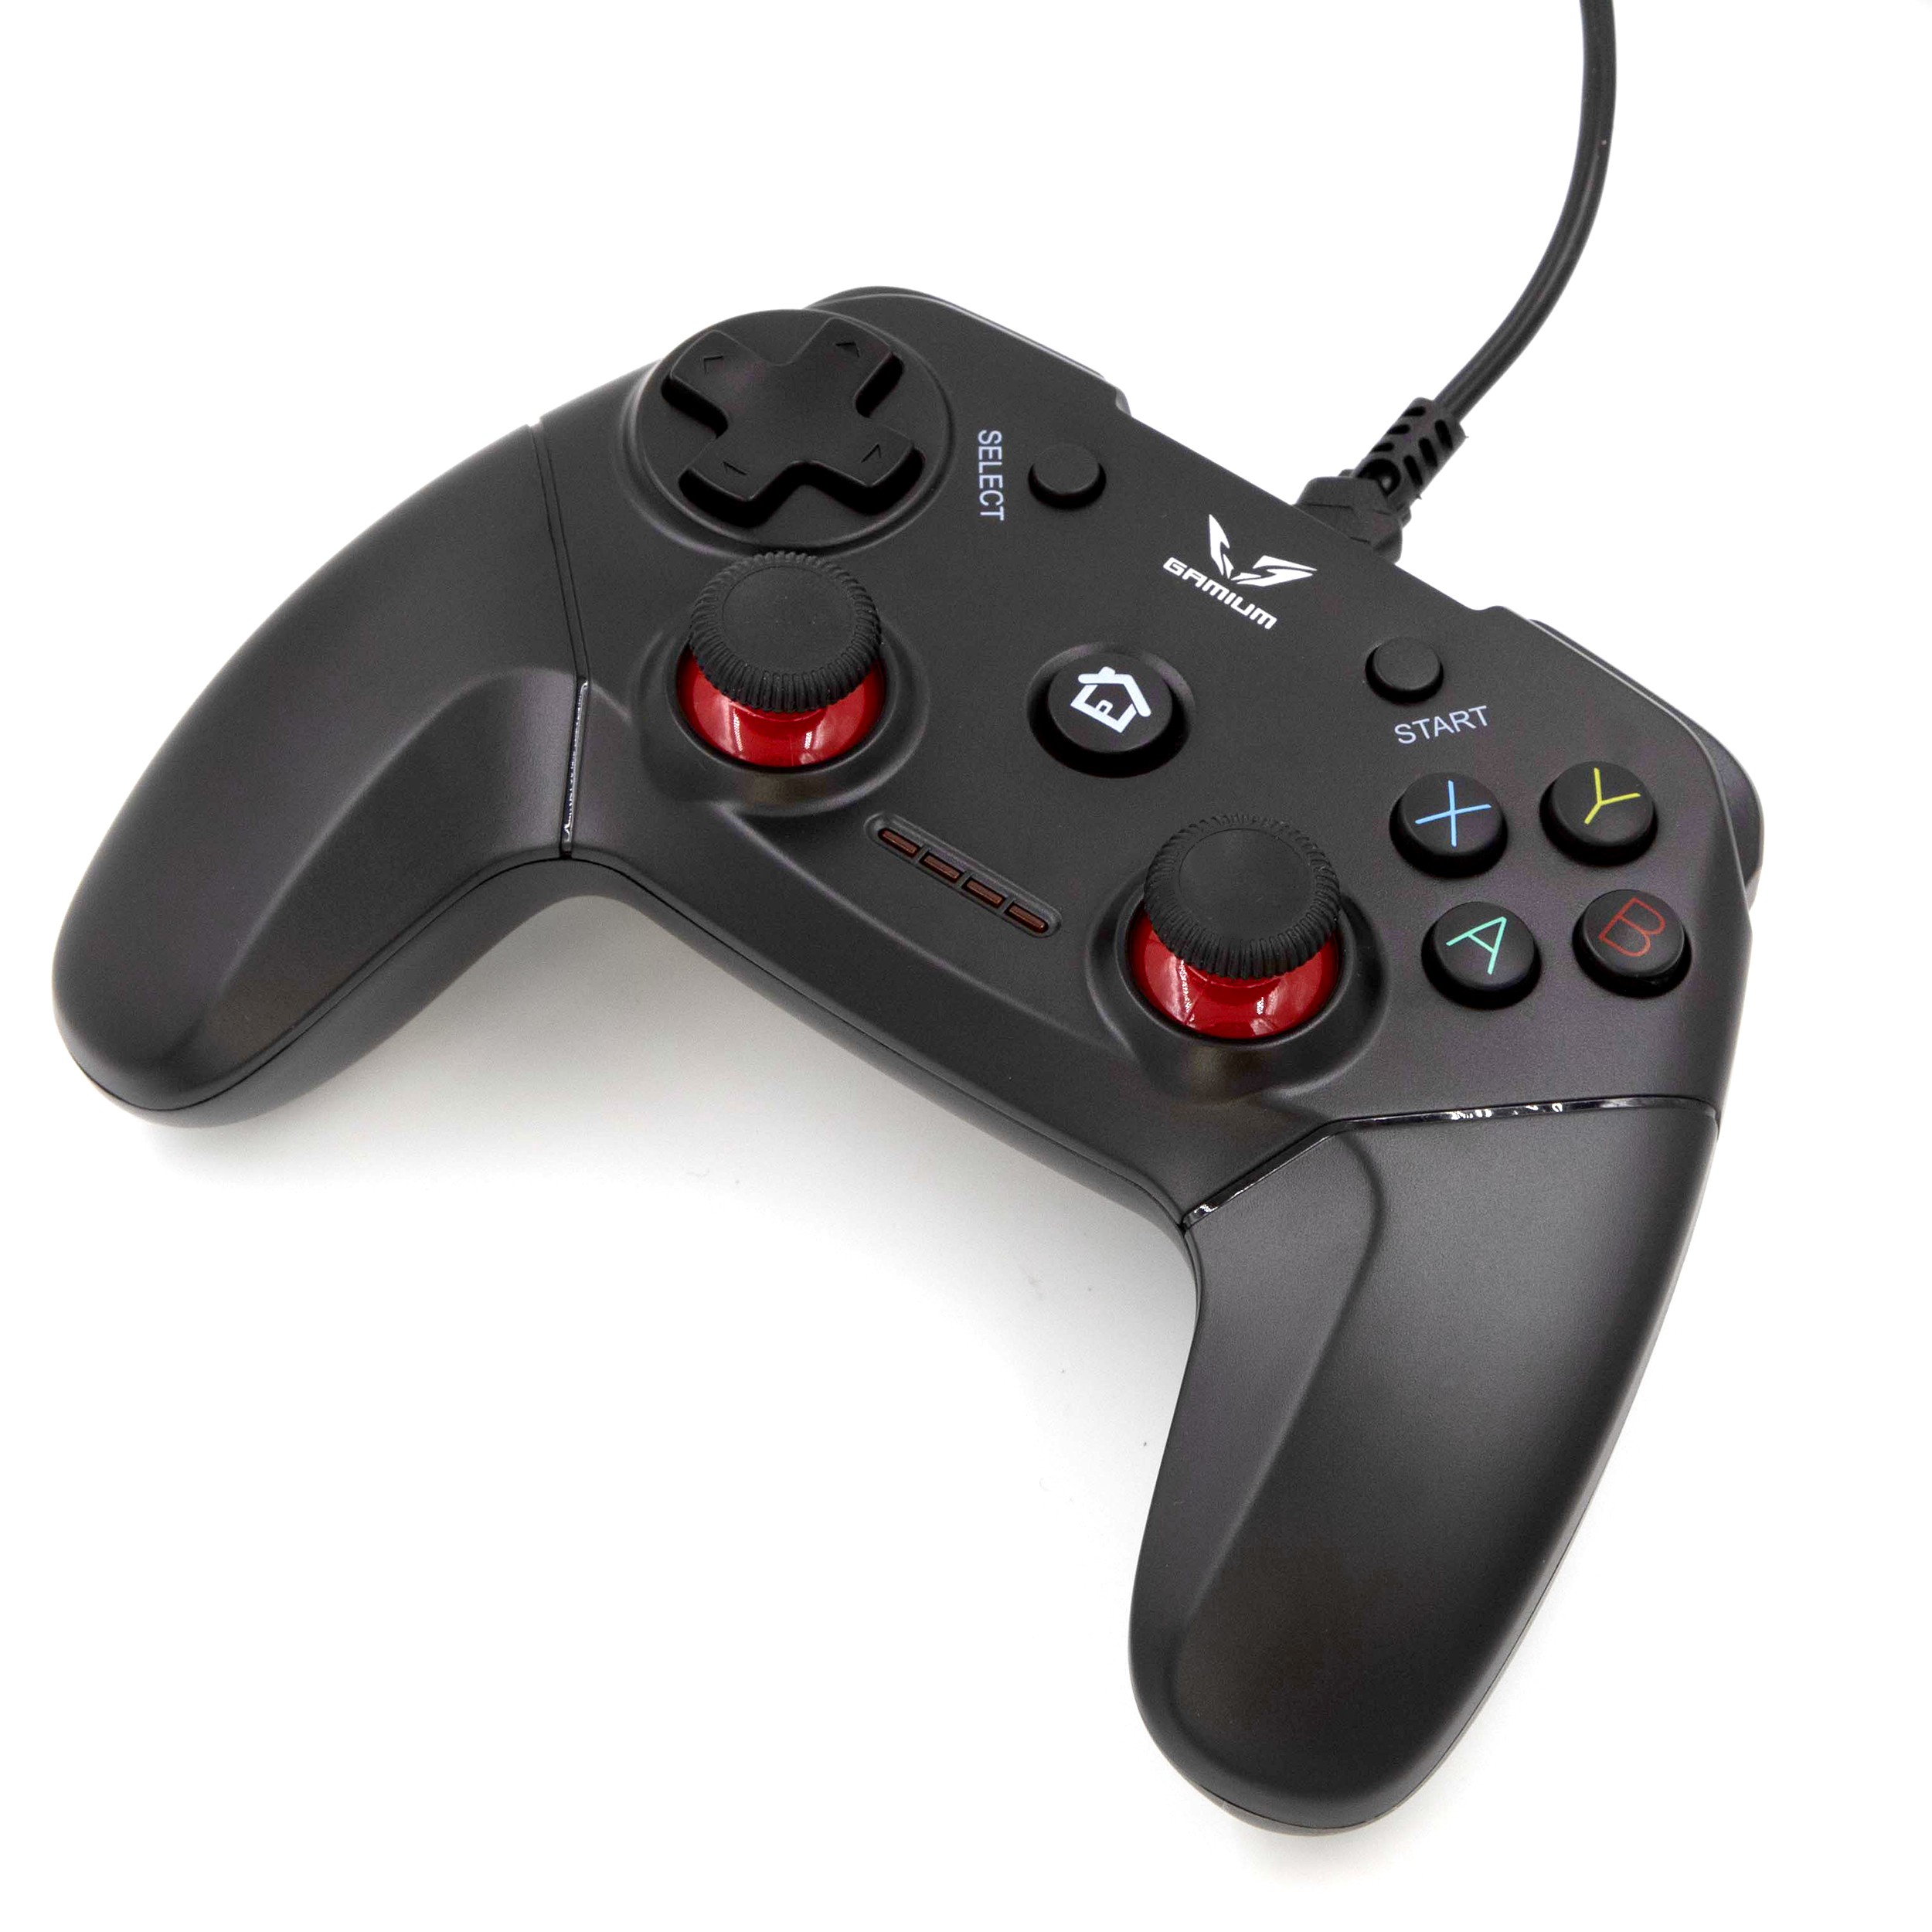 http://www.connect-we.fr/3262/manette-gaming-pc-filaire.jpg